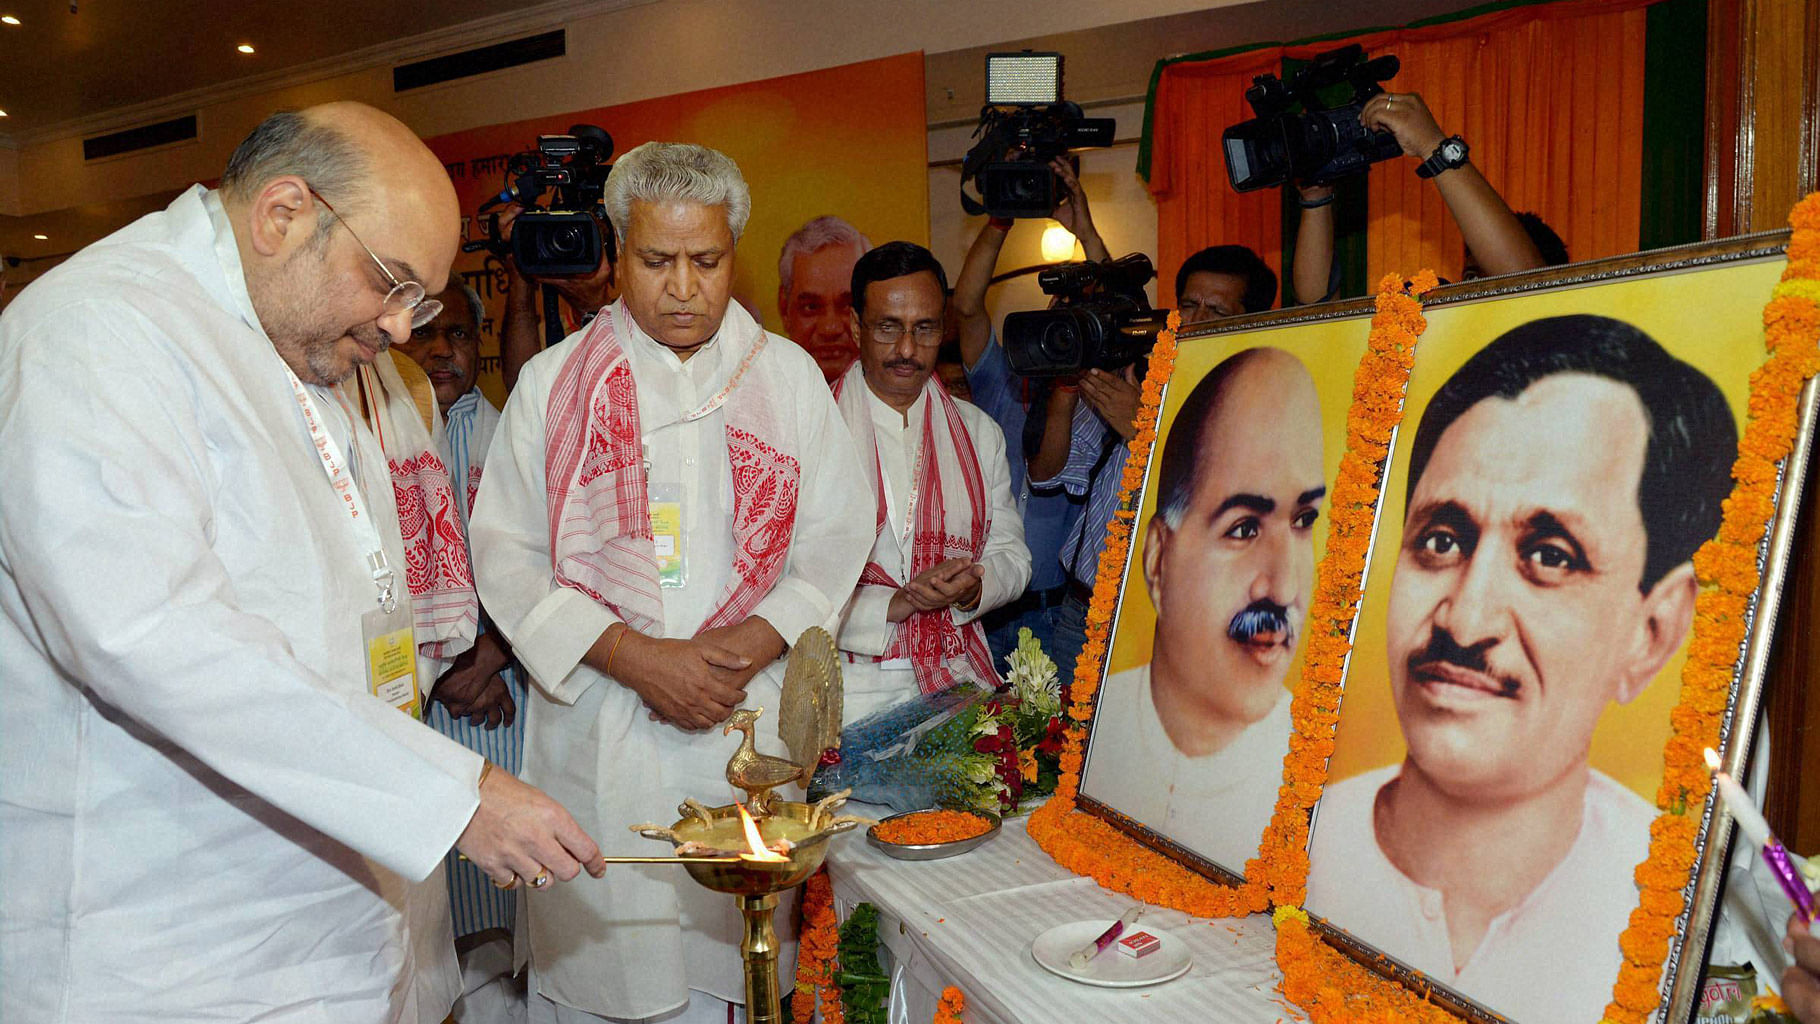 

BJP National President Amit Shah lighting the lamp to inaugurate BJP’s national executive meeting in Allahabad, 12 June  2016. (Photo: PTI)